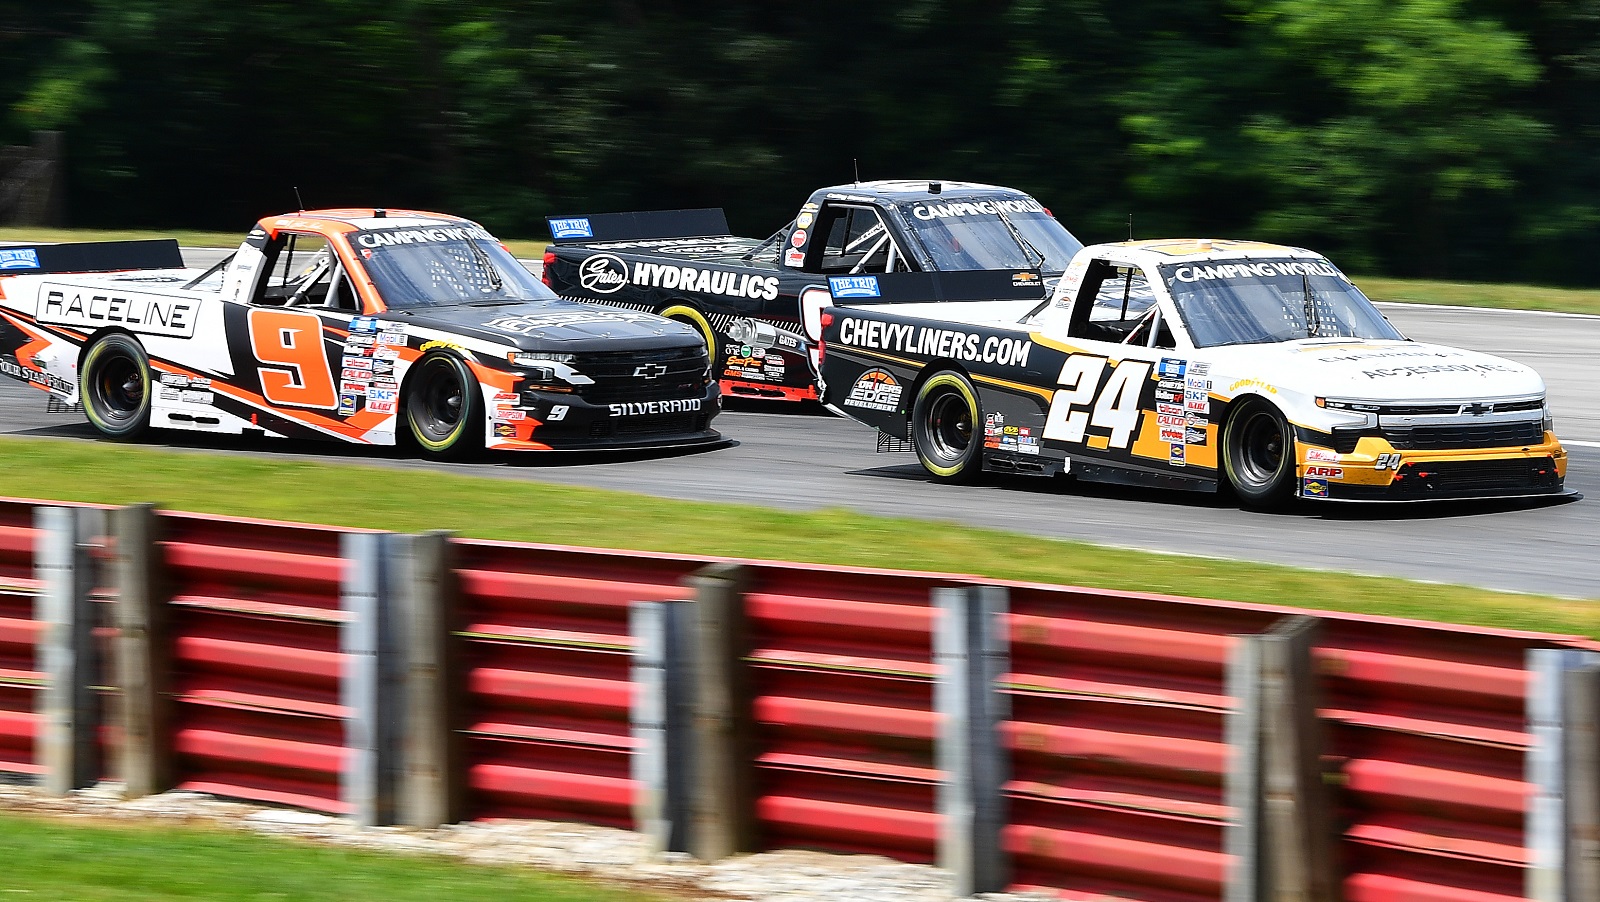 Jack Wood, driver of the No. 24 Chevrolet, and Blaine Perkins, driver of the No. 9 Chevrolet, race during the NASCAR Camping World Truck Series O'Reilly Auto Parts 150 at Mid-Ohio Sports Car Course on July 9, 2022. | Ben Jackson/Getty Images